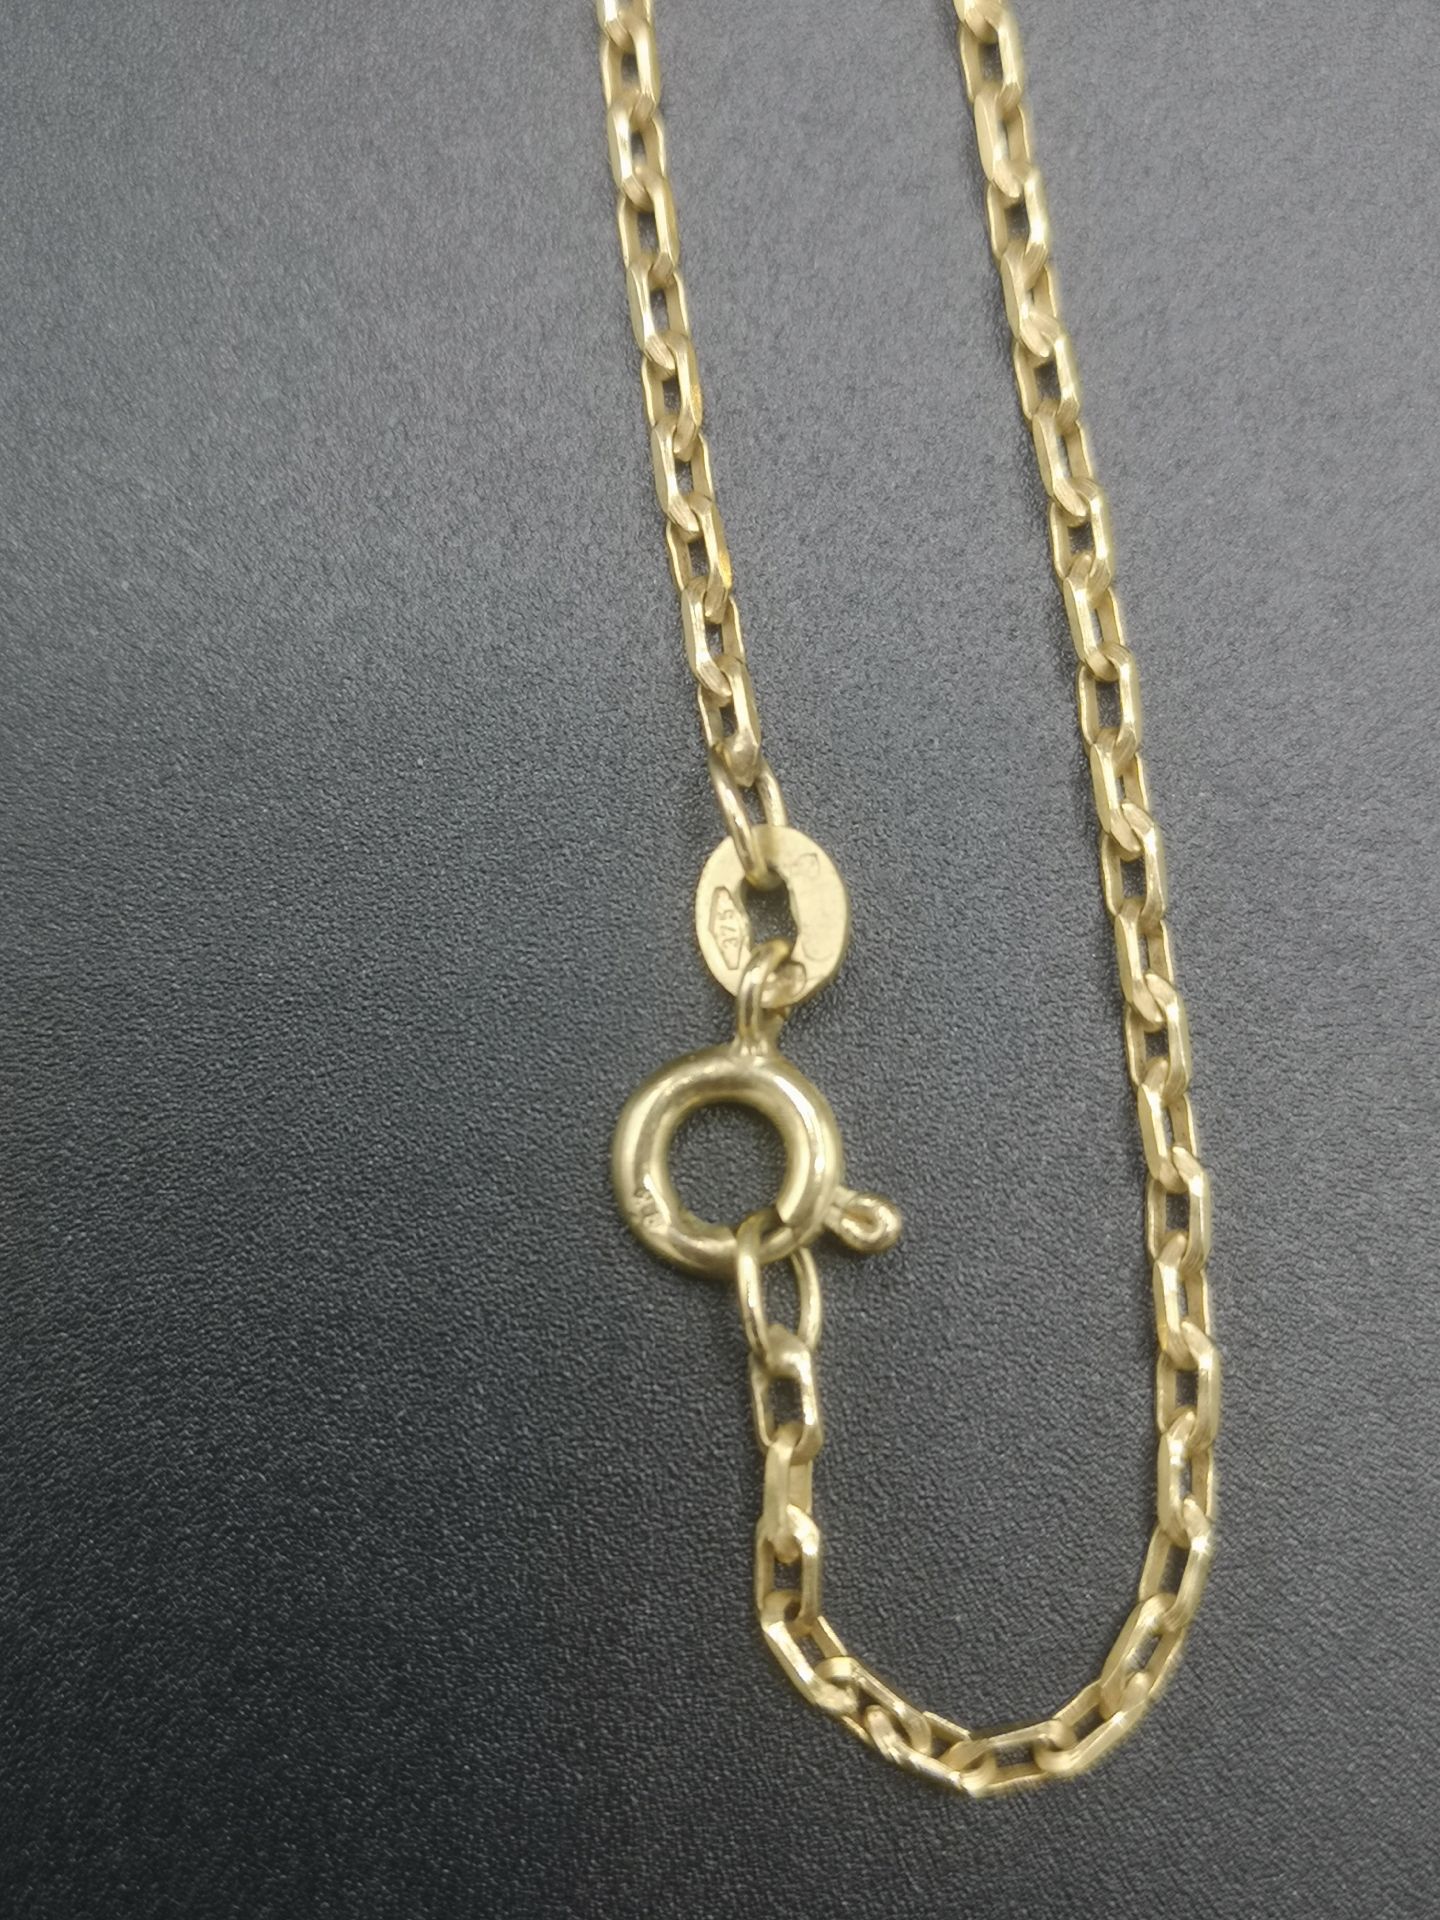 9ct gold necklace and crucifix - Image 6 of 6